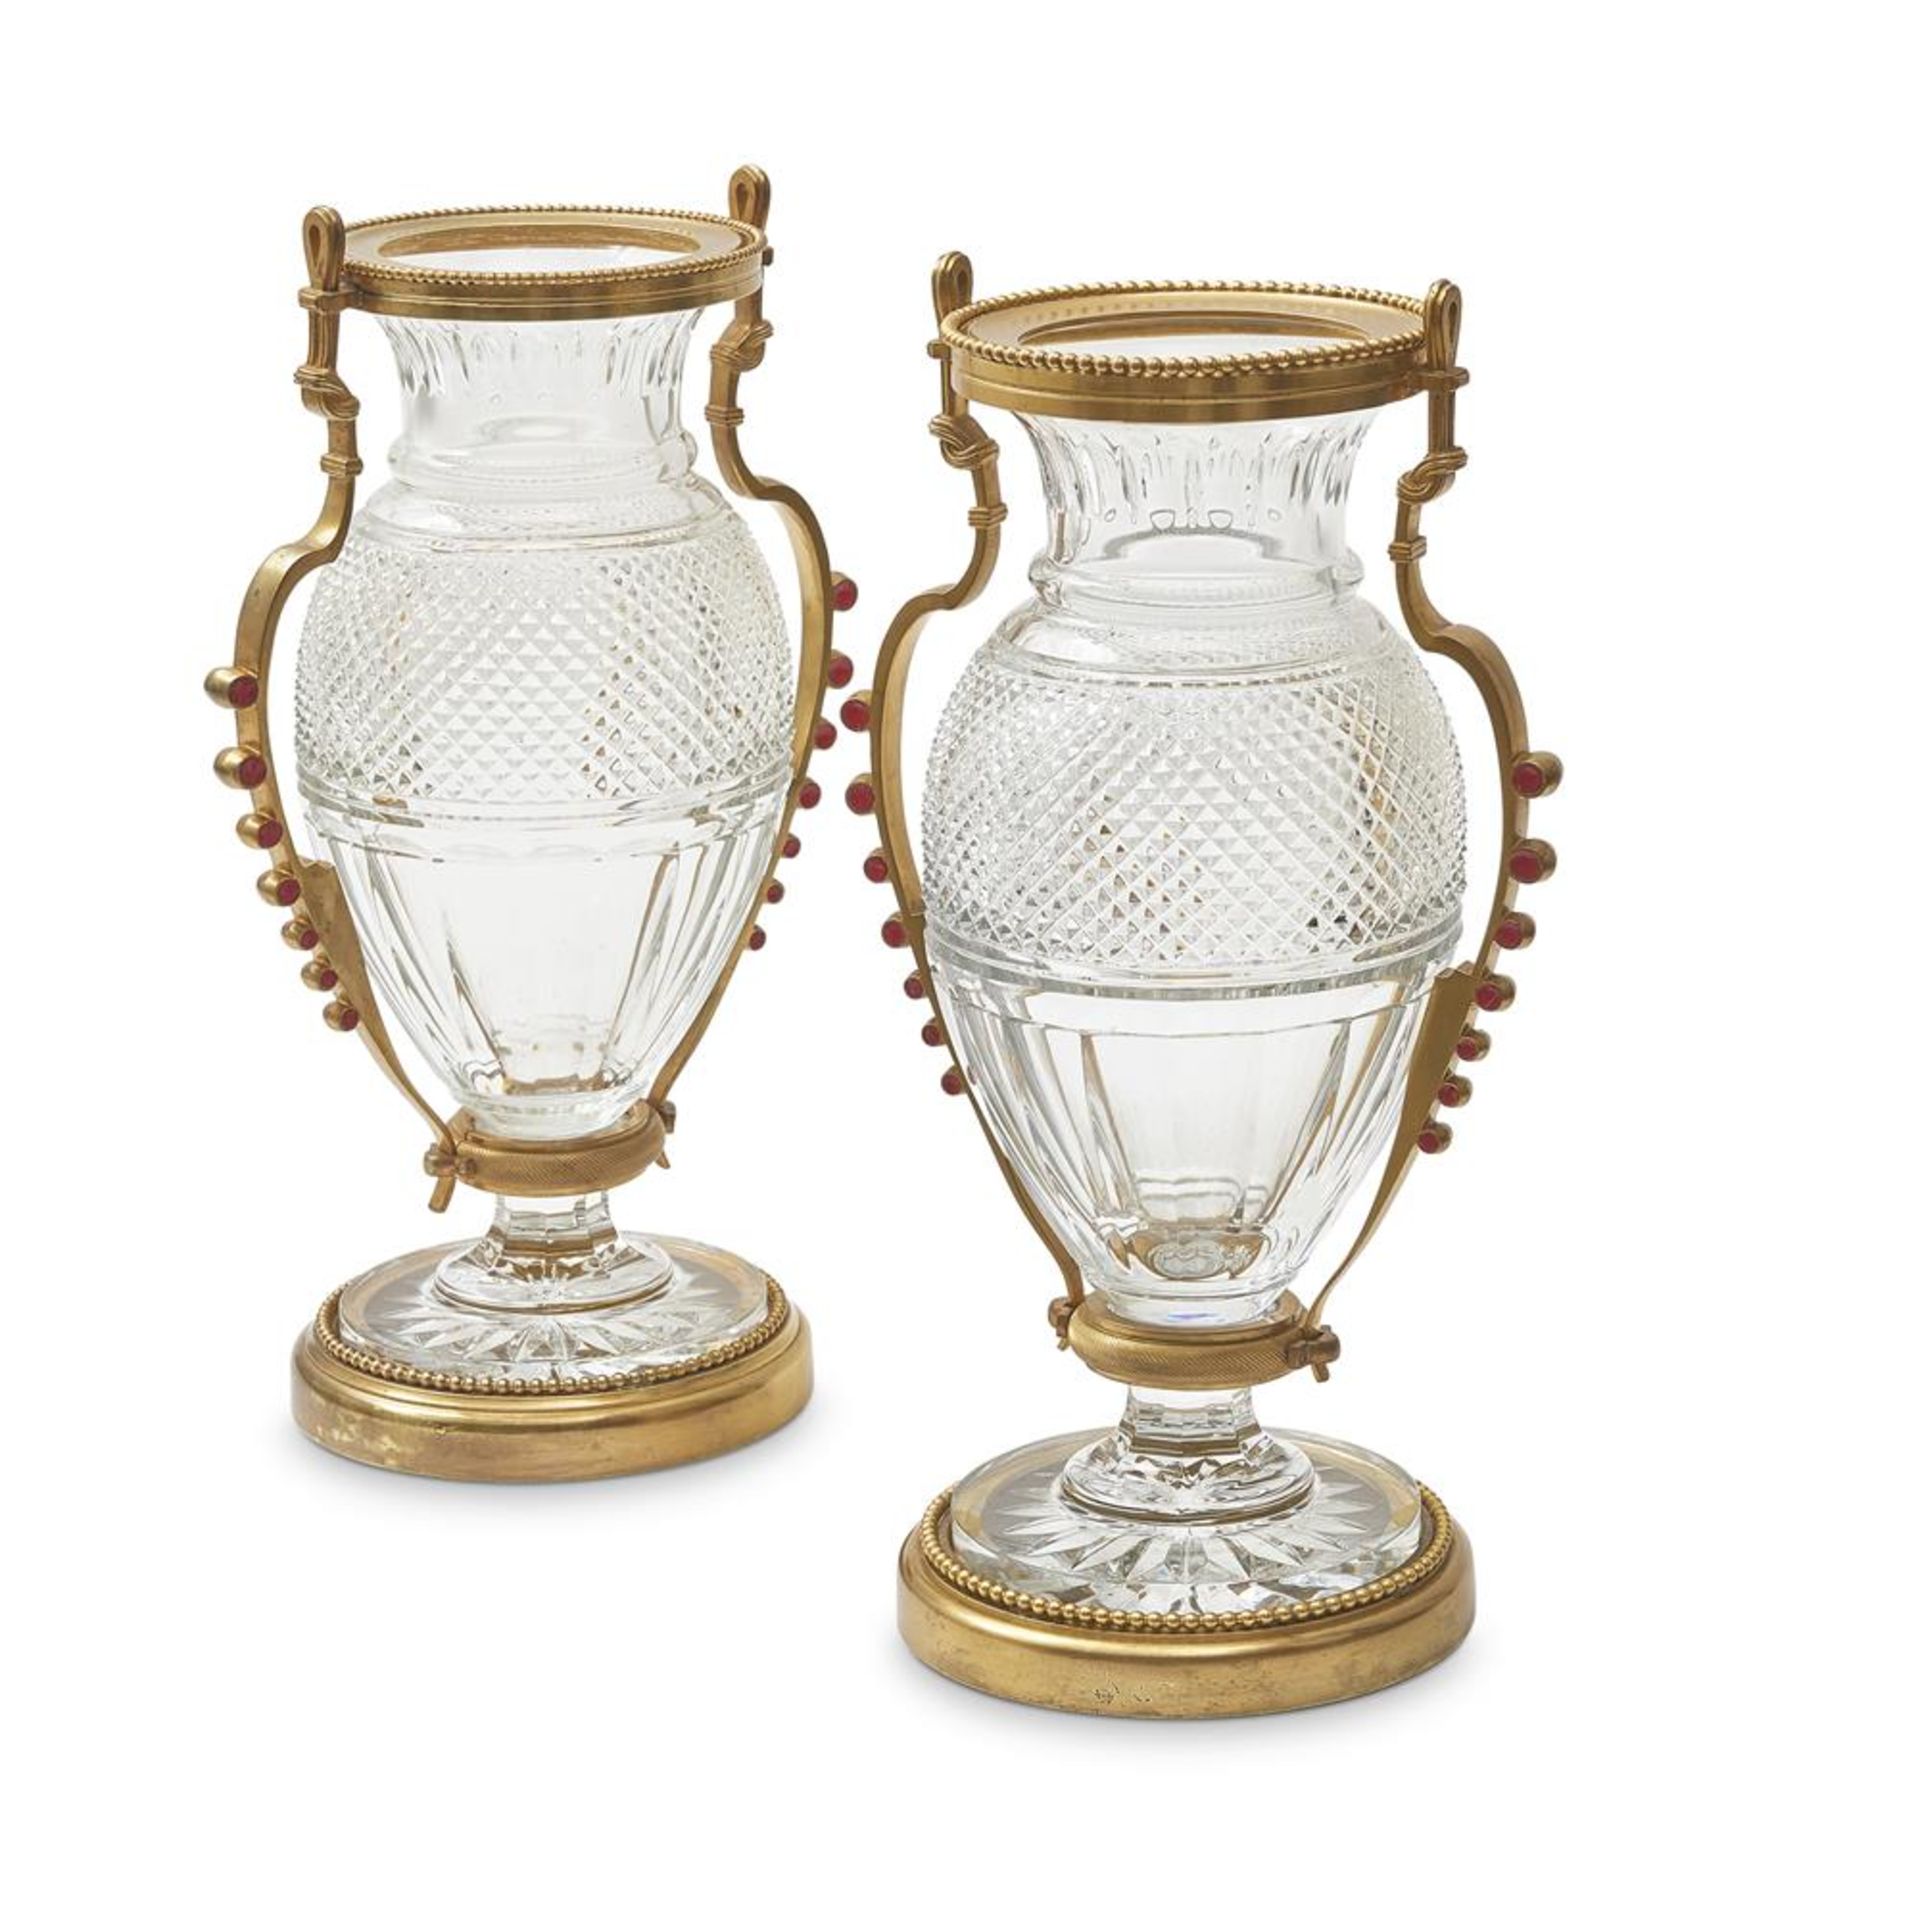 A PAIR OF BACCARAT CUT AND MOULDED GLASS AND GILT METAL MOUNTED VASES, 20TH CENTURY